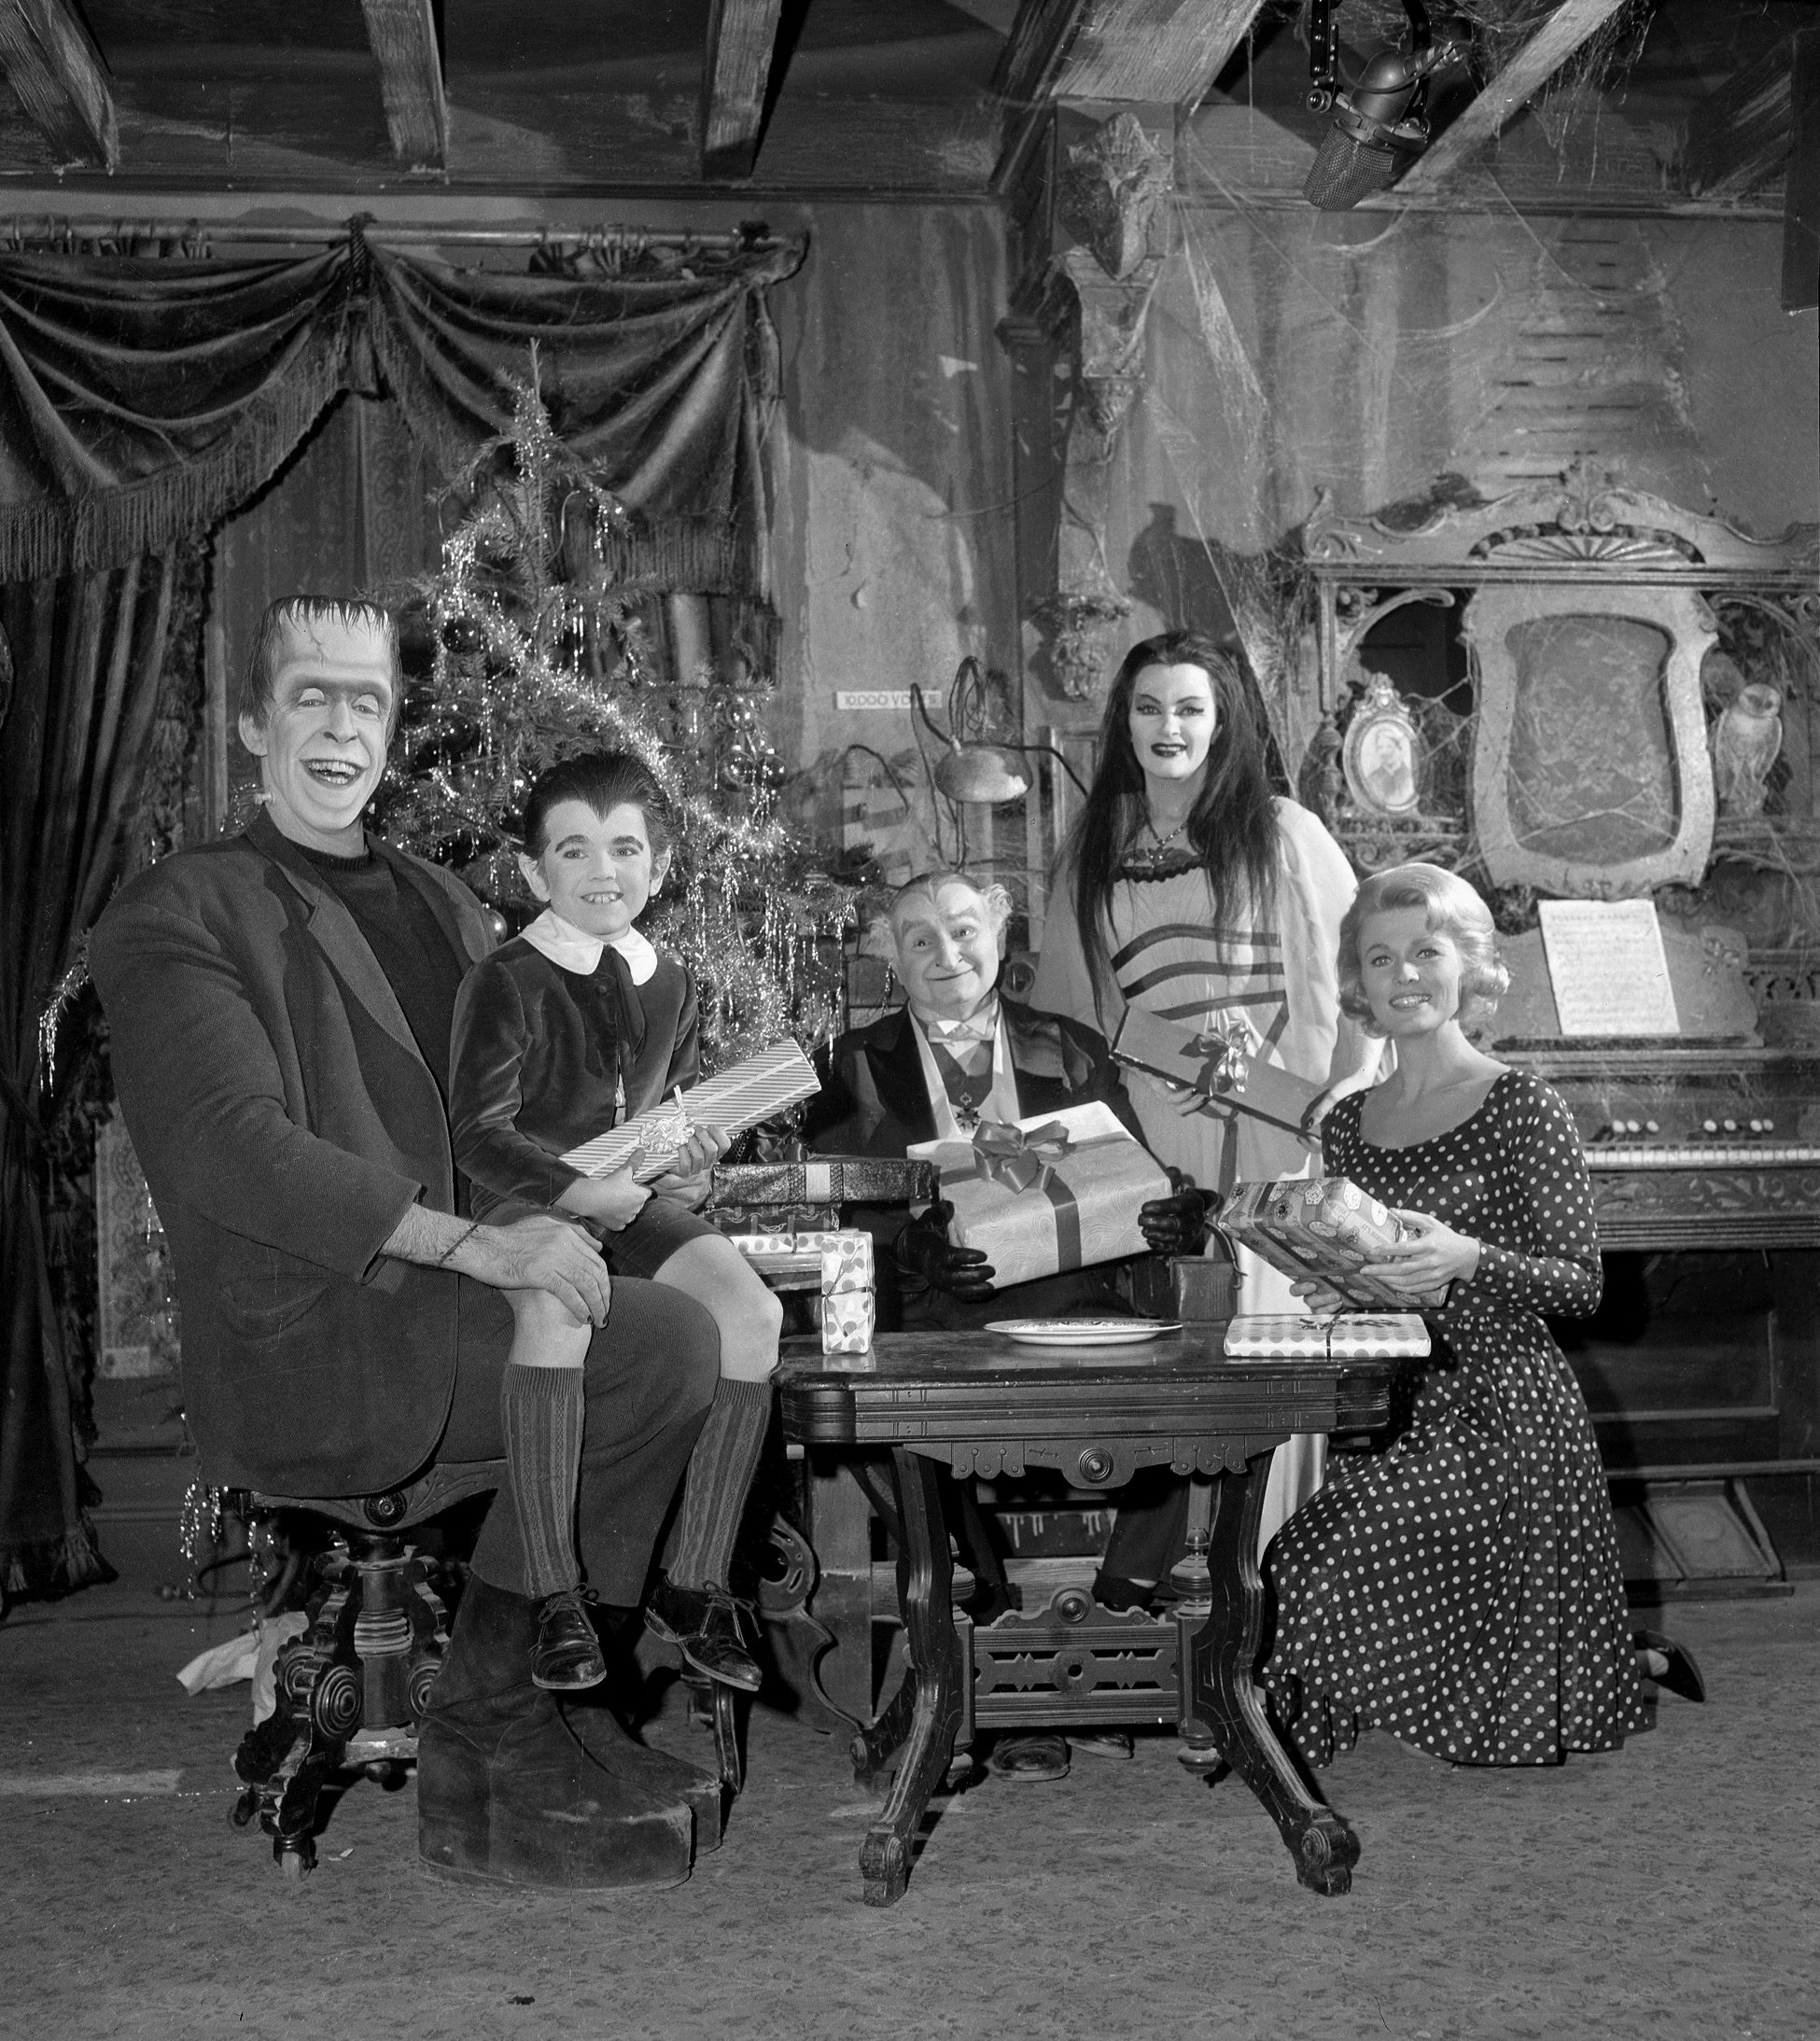 The cast of 'The Munsters', from left to right: Fred Gwynne, Butch Patrick, Al Lewis, Yvonne De Carlo, and Pat Priest